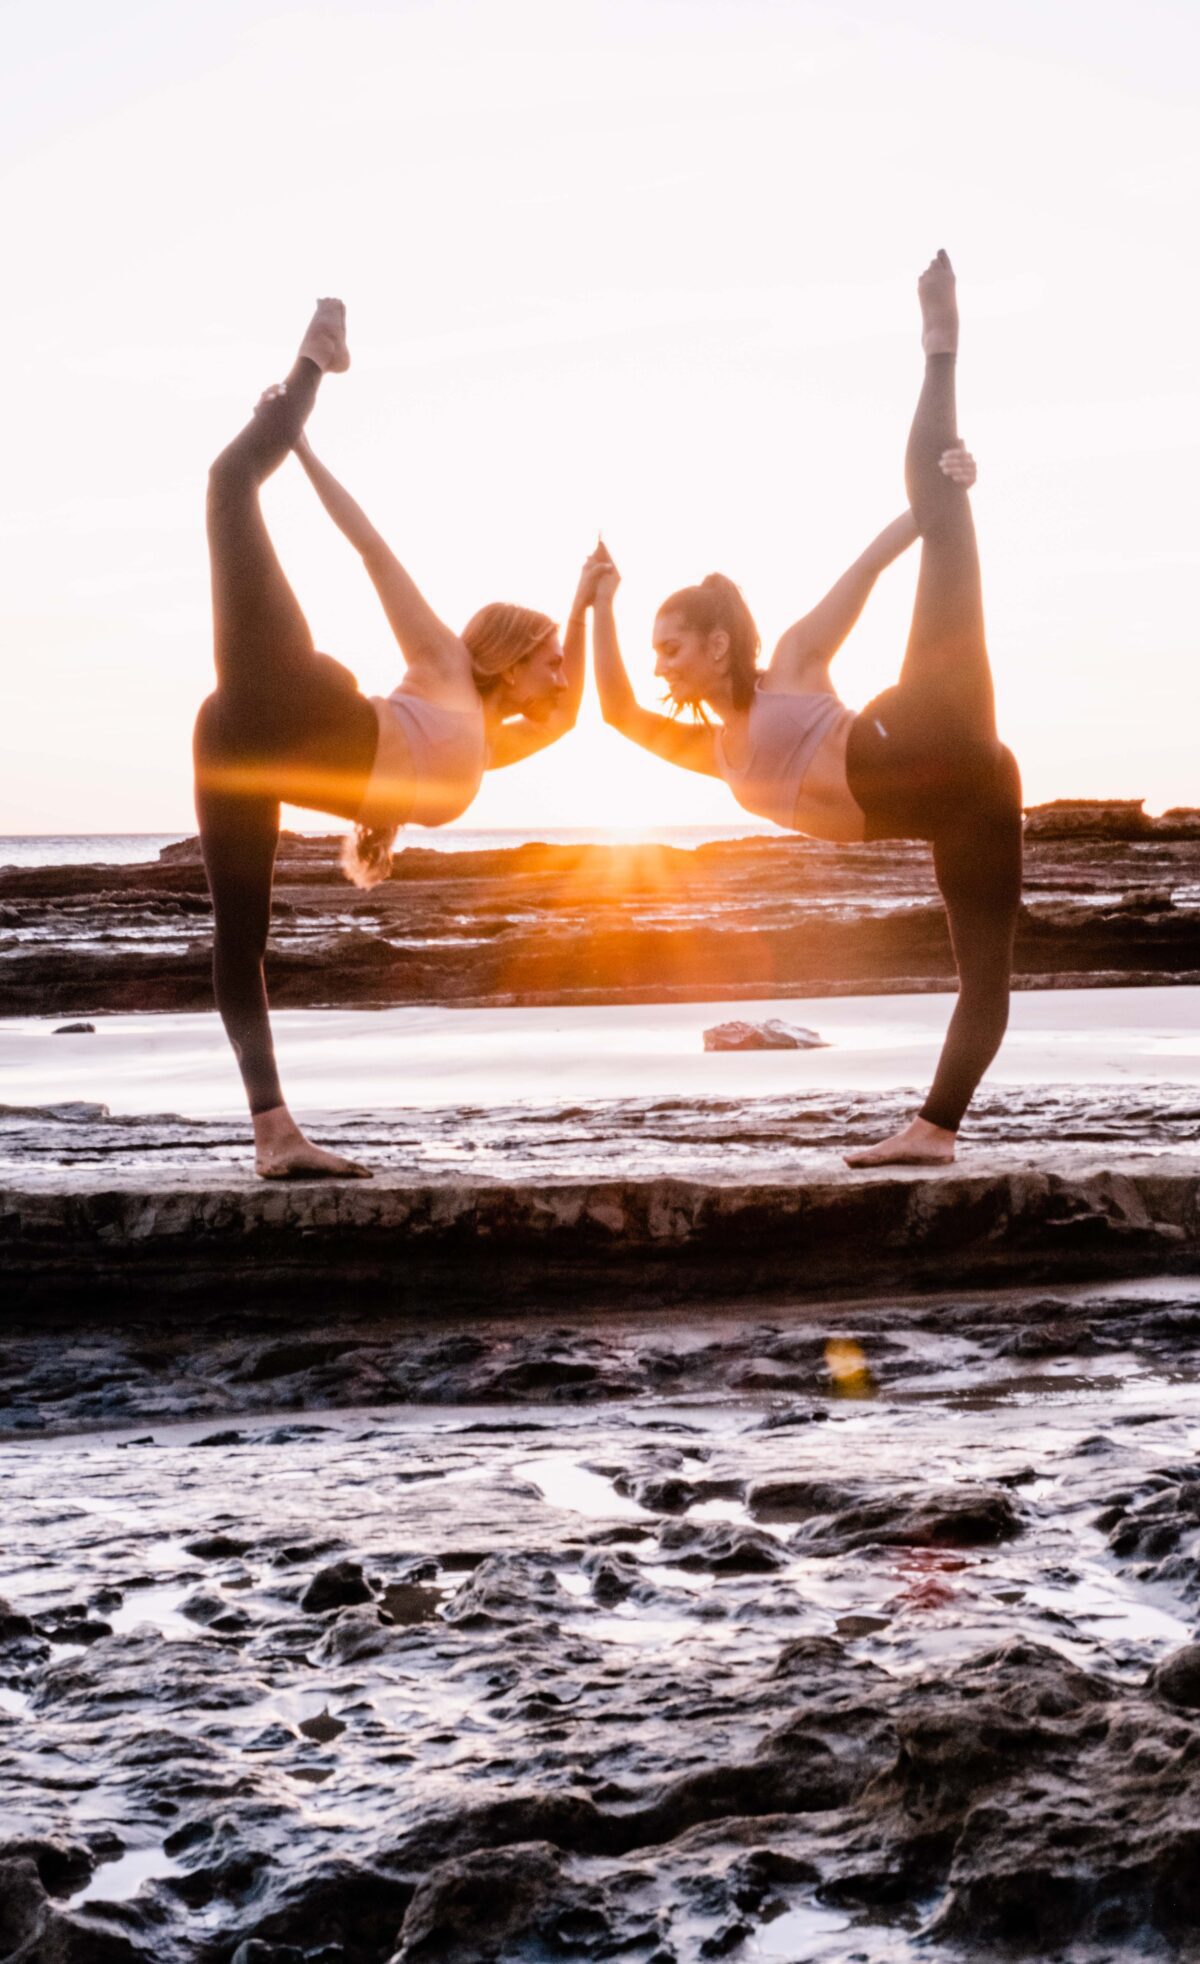 Yoga on the Beach: 4 Tips for a Rewarding Session